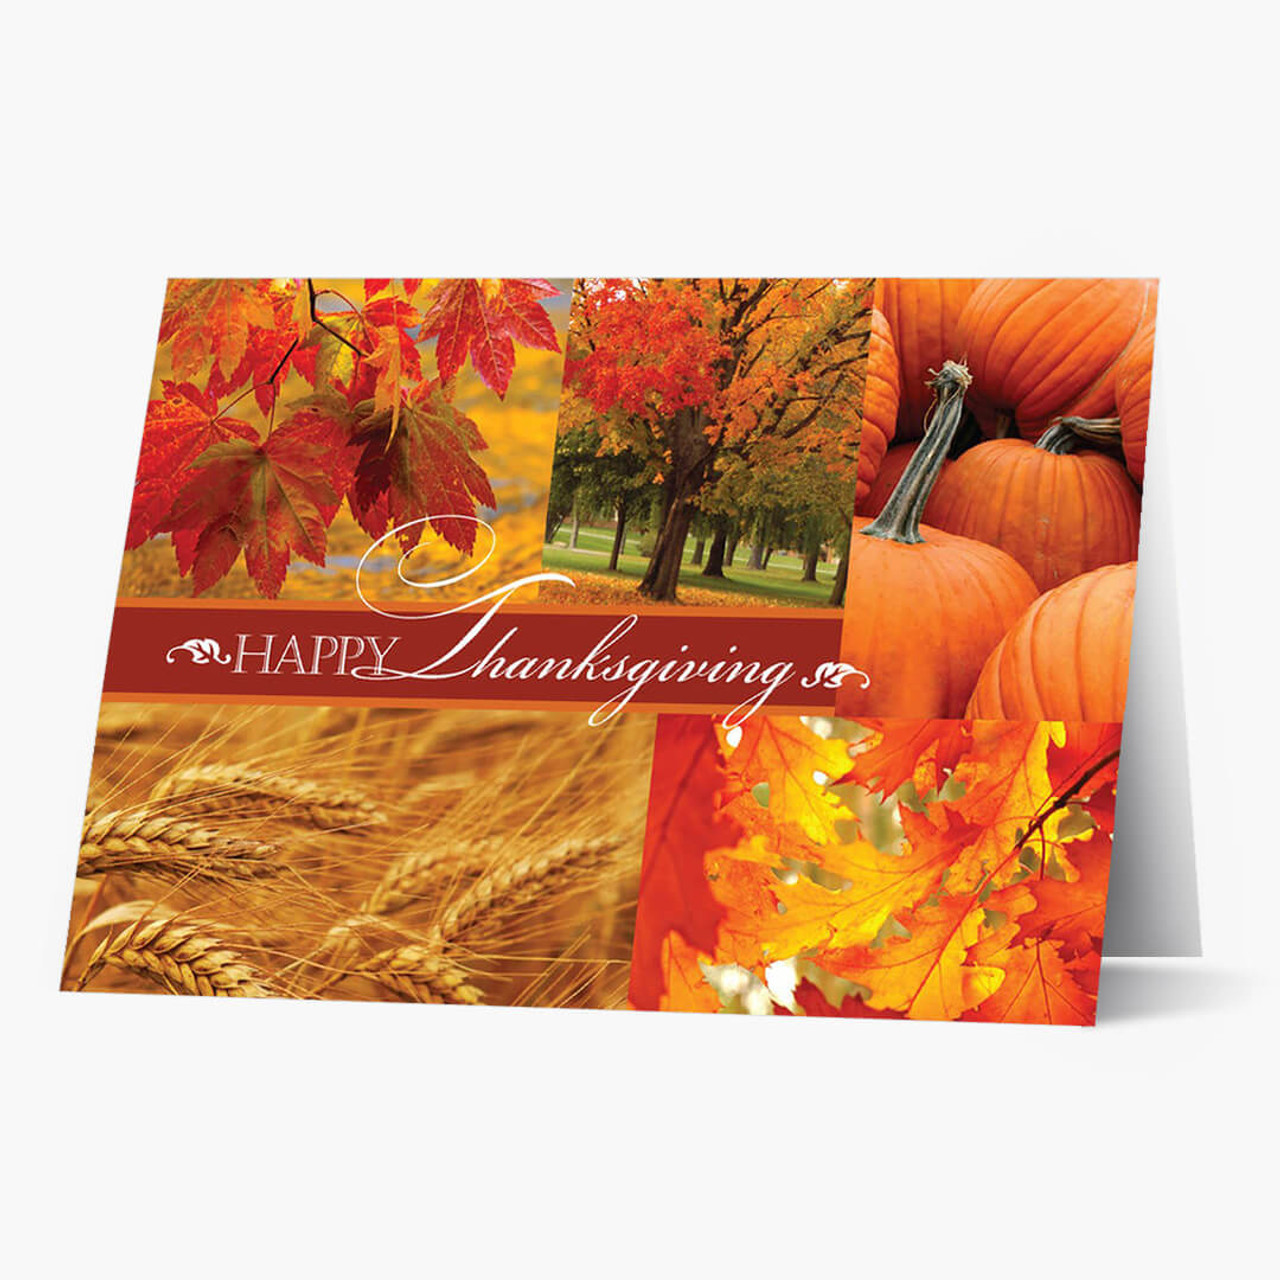 Bountiful Wishes Thanksgiving Card